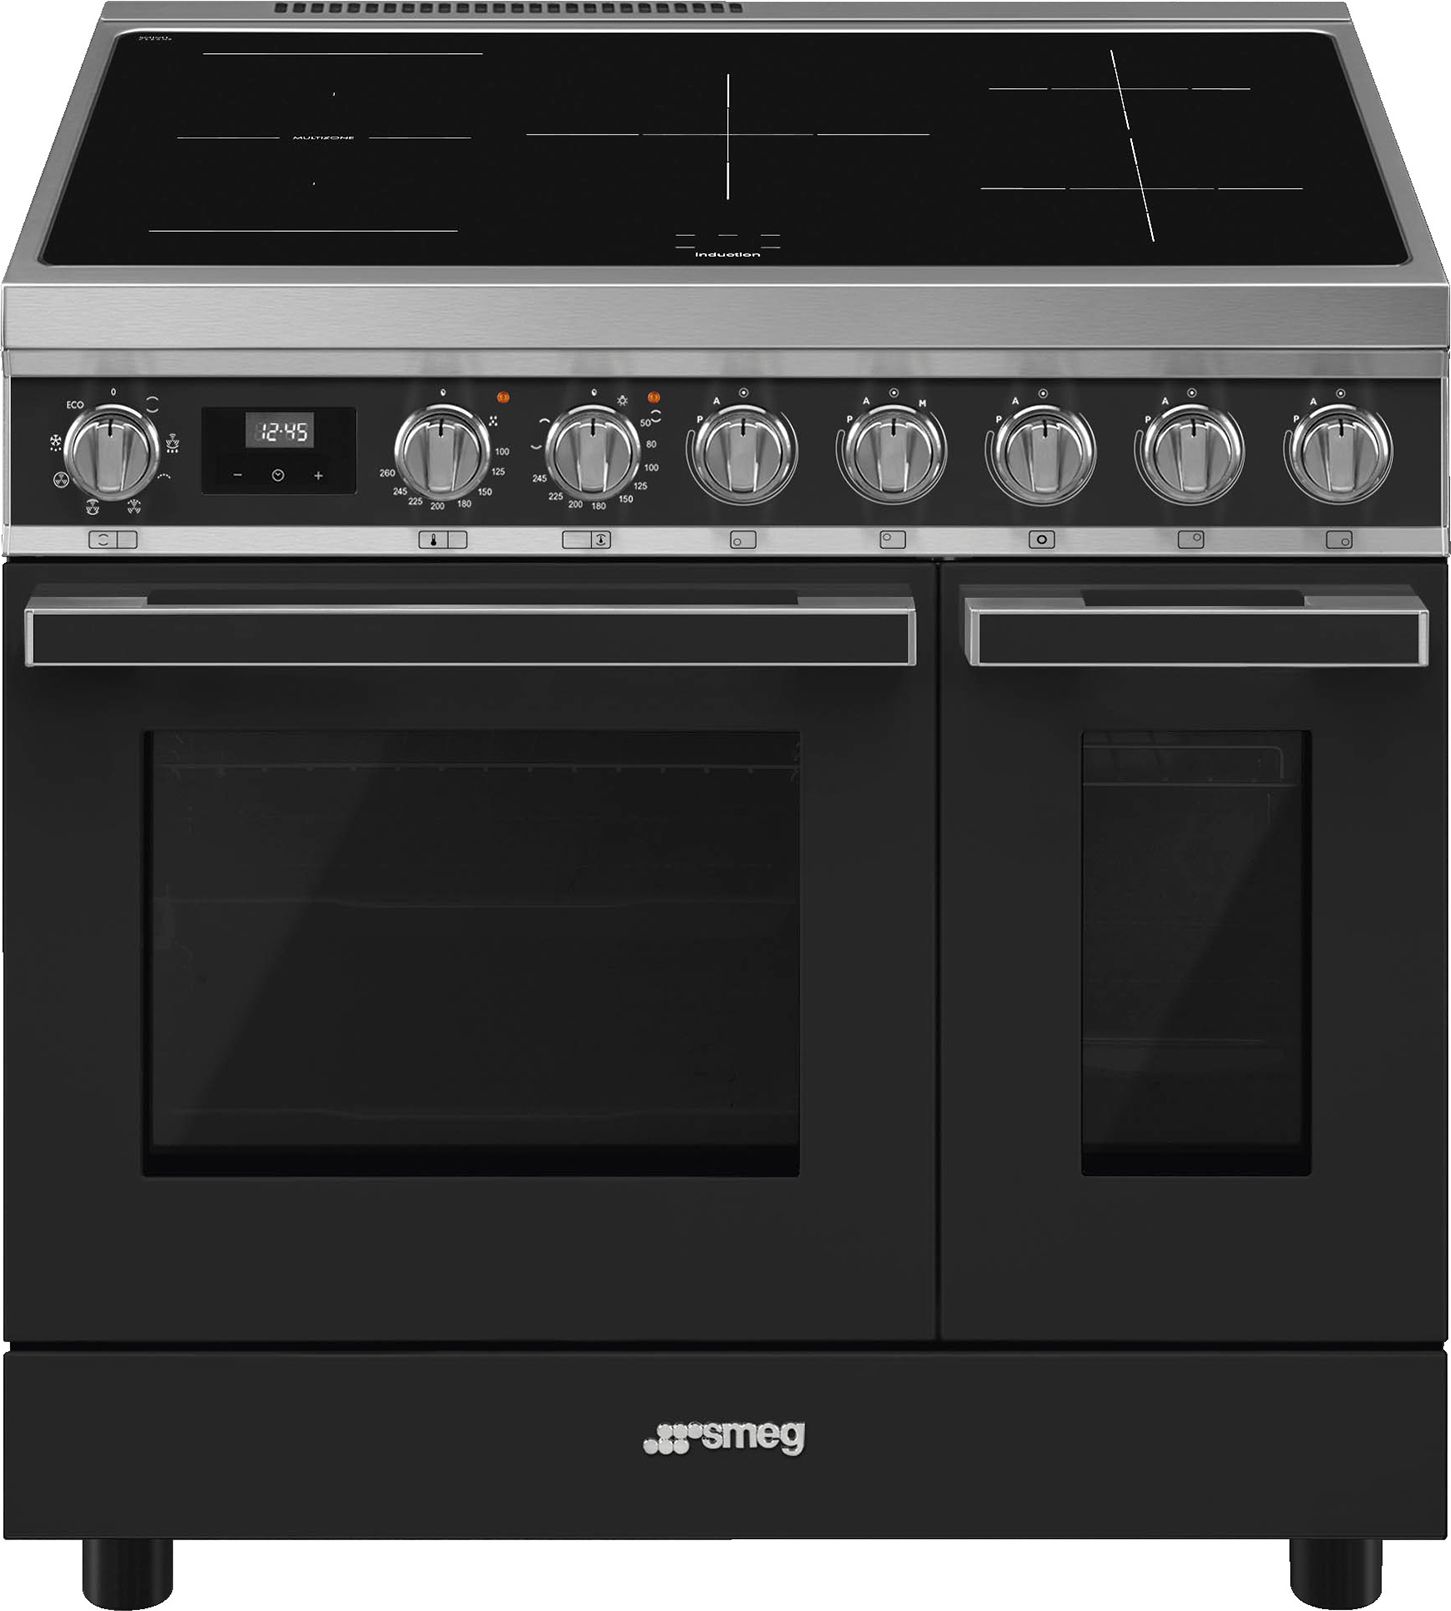 Smeg Portofino CPF92IMA Electric Range Cooker with Induction Hob - Anthracite - A/A Rated, Black